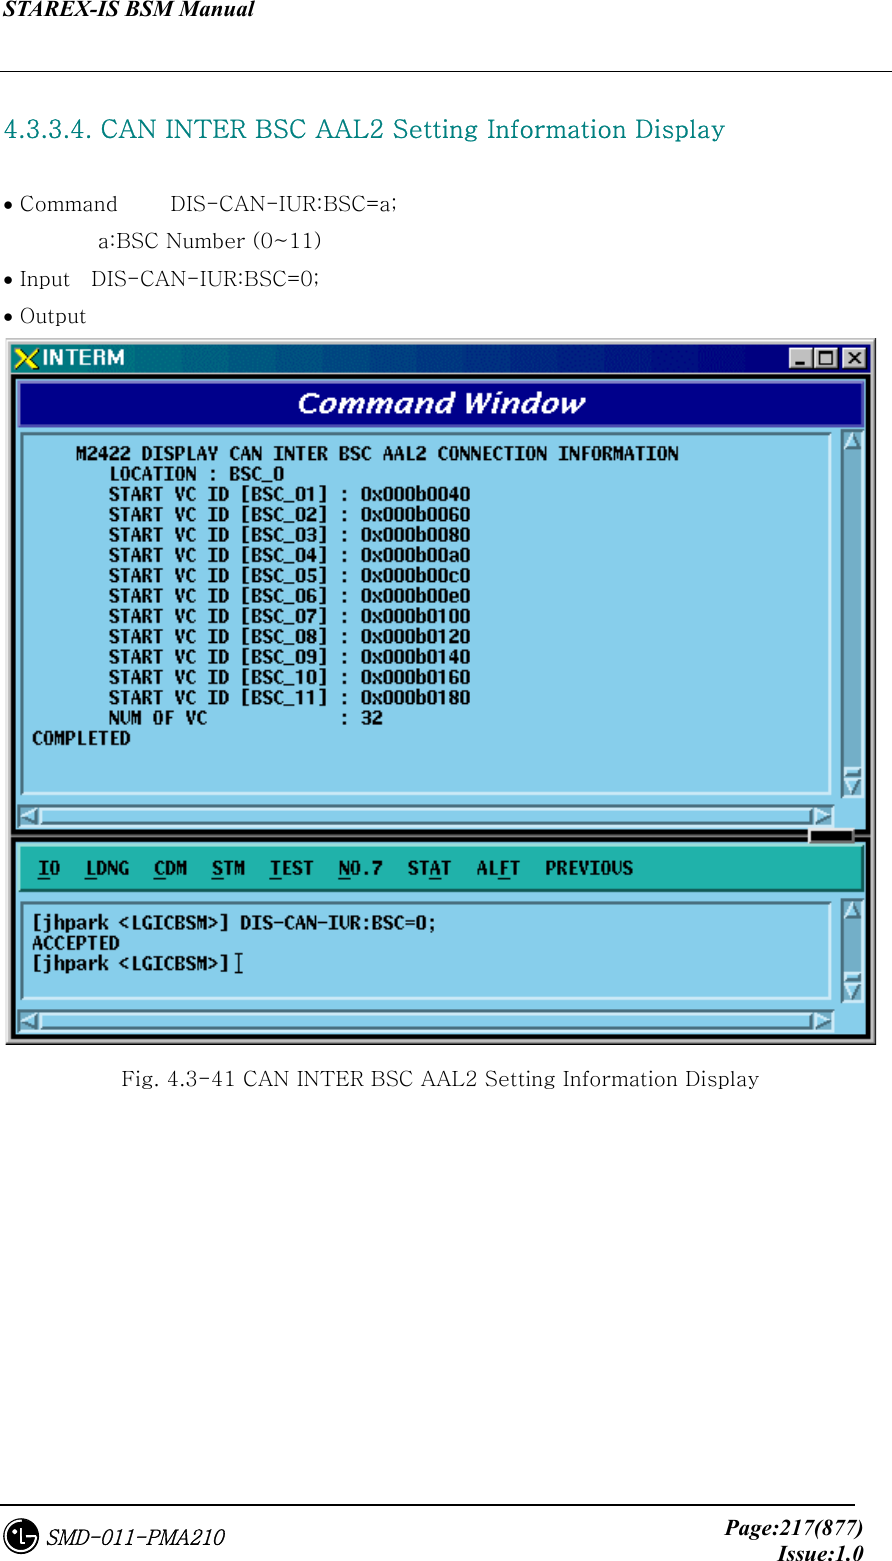 STAREX-IS BSM Manual     Page:217(877)Issue:1.0SMD-011-PMA210  4.3.3.4. CAN INTER BSC AAL2 Setting Information Display  • Command     DIS-CAN-IUR:BSC=a;          a:BSC Number (0~11) • Input    DIS-CAN-IUR:BSC=0; • Output  Fig. 4.3-41 CAN INTER BSC AAL2 Setting Information Display 